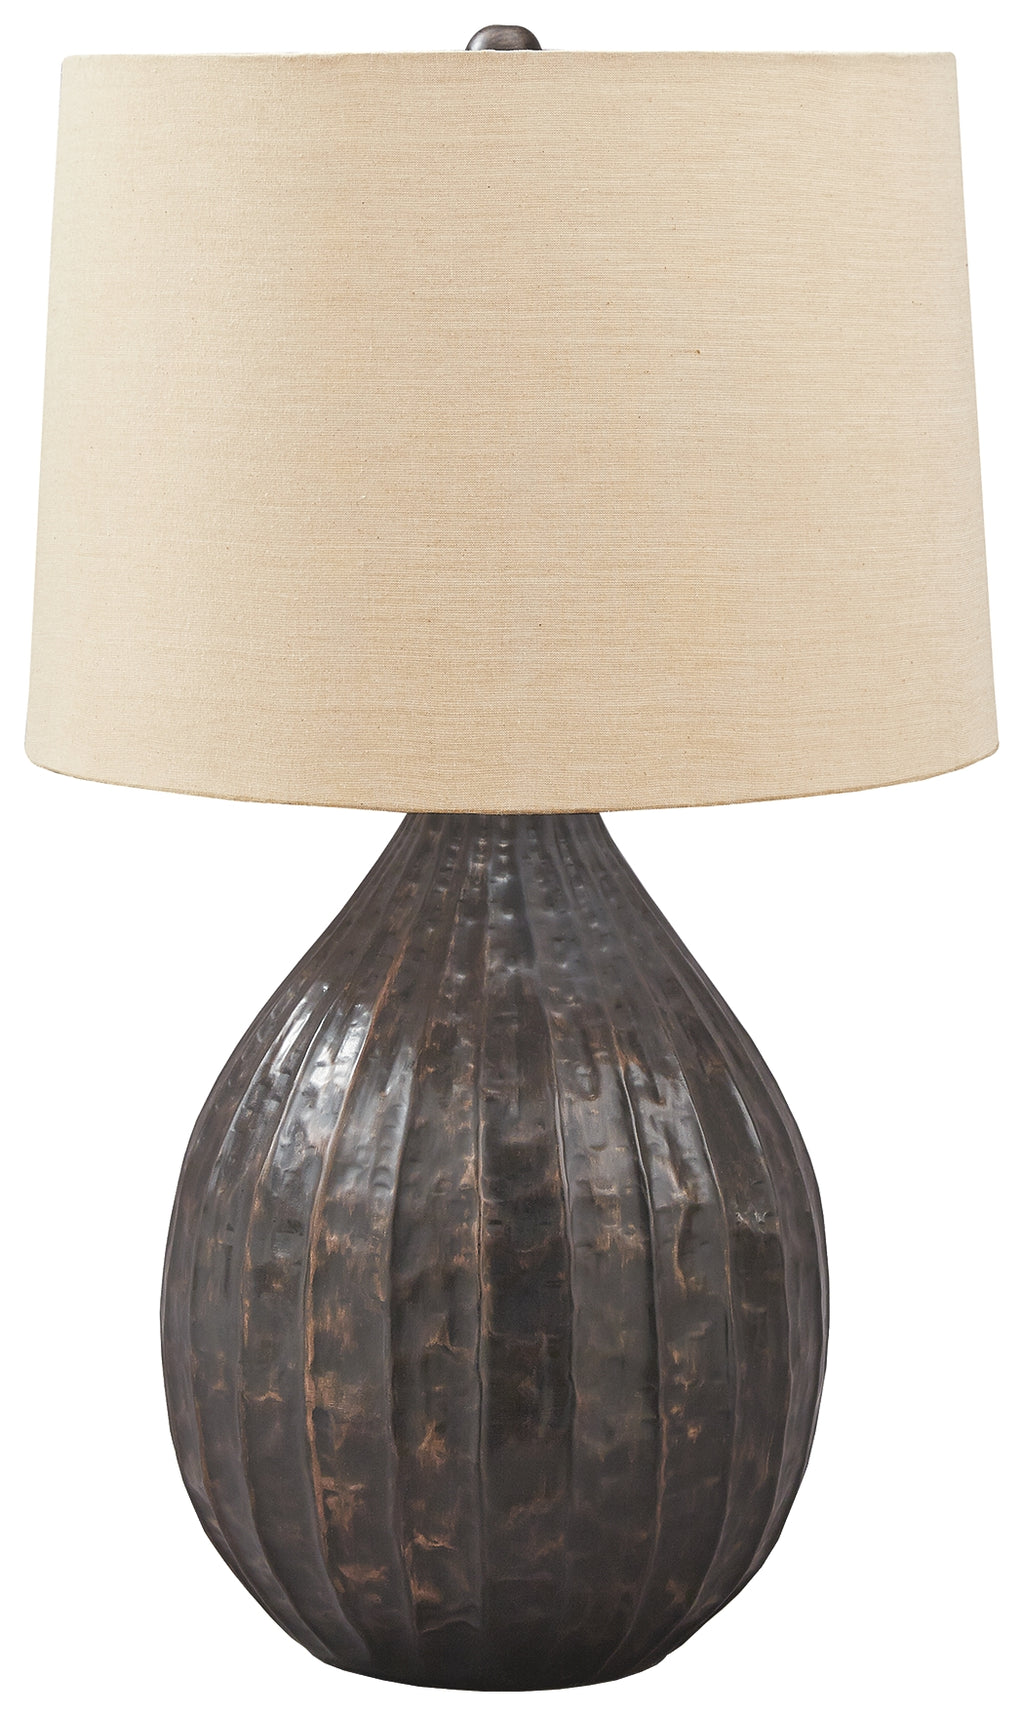 Marloes L207424 Copper Finish Metal Table Lamp 1CN